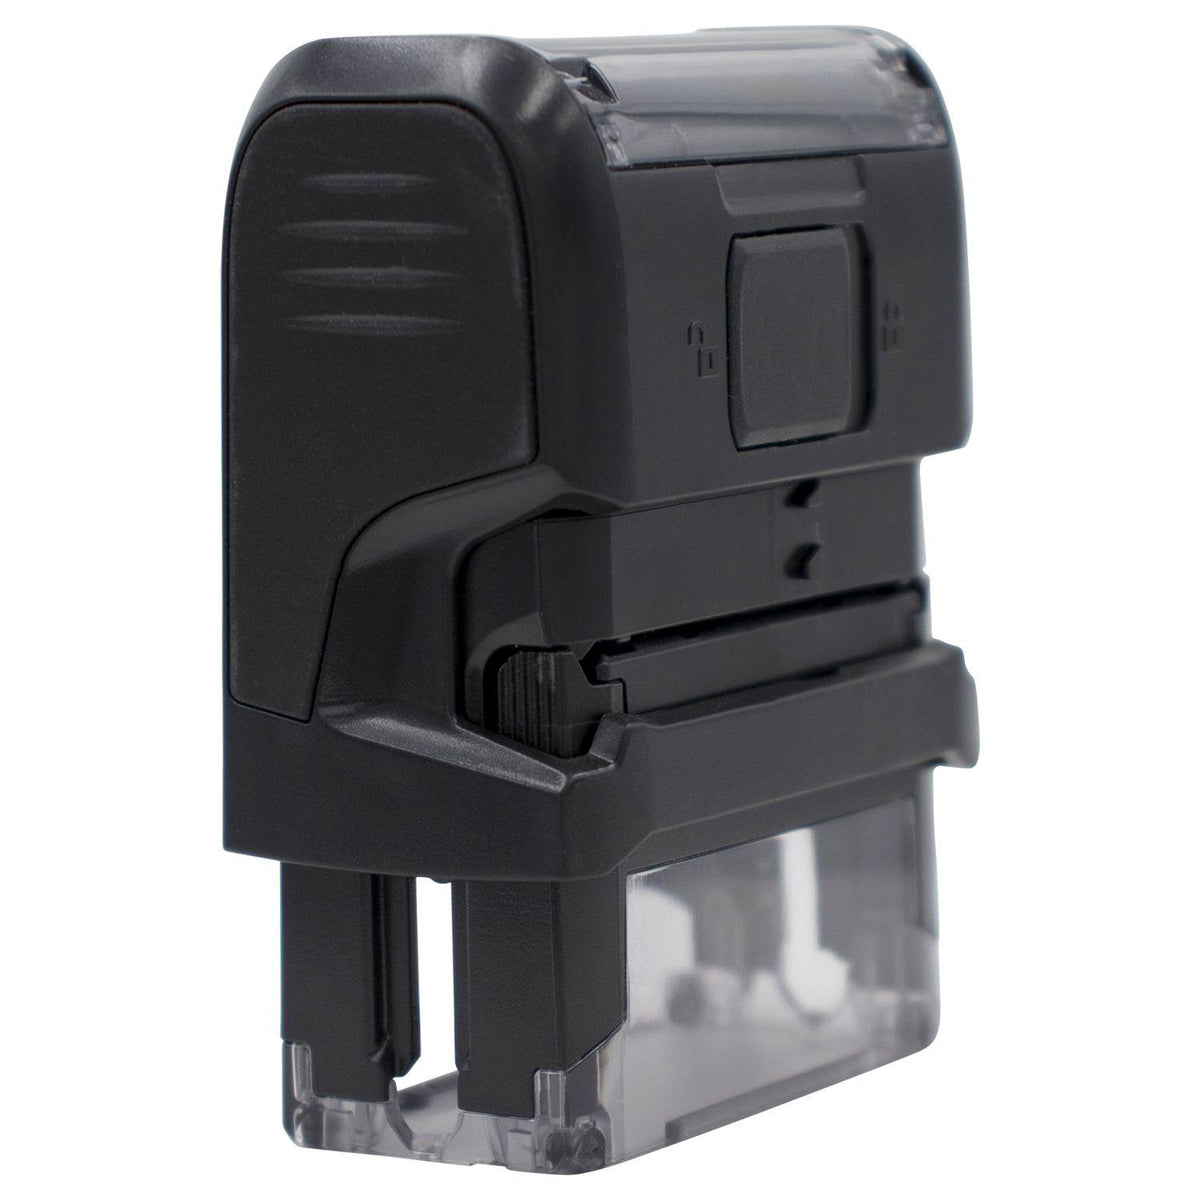 Self Inking Outline Self Inking Copy Stamp - Engineer Seal Stamps - Brand_Trodat, Impression Size_Small, Stamp Type_Self-Inking Stamp, Type of Use_General, Type of Use_Office